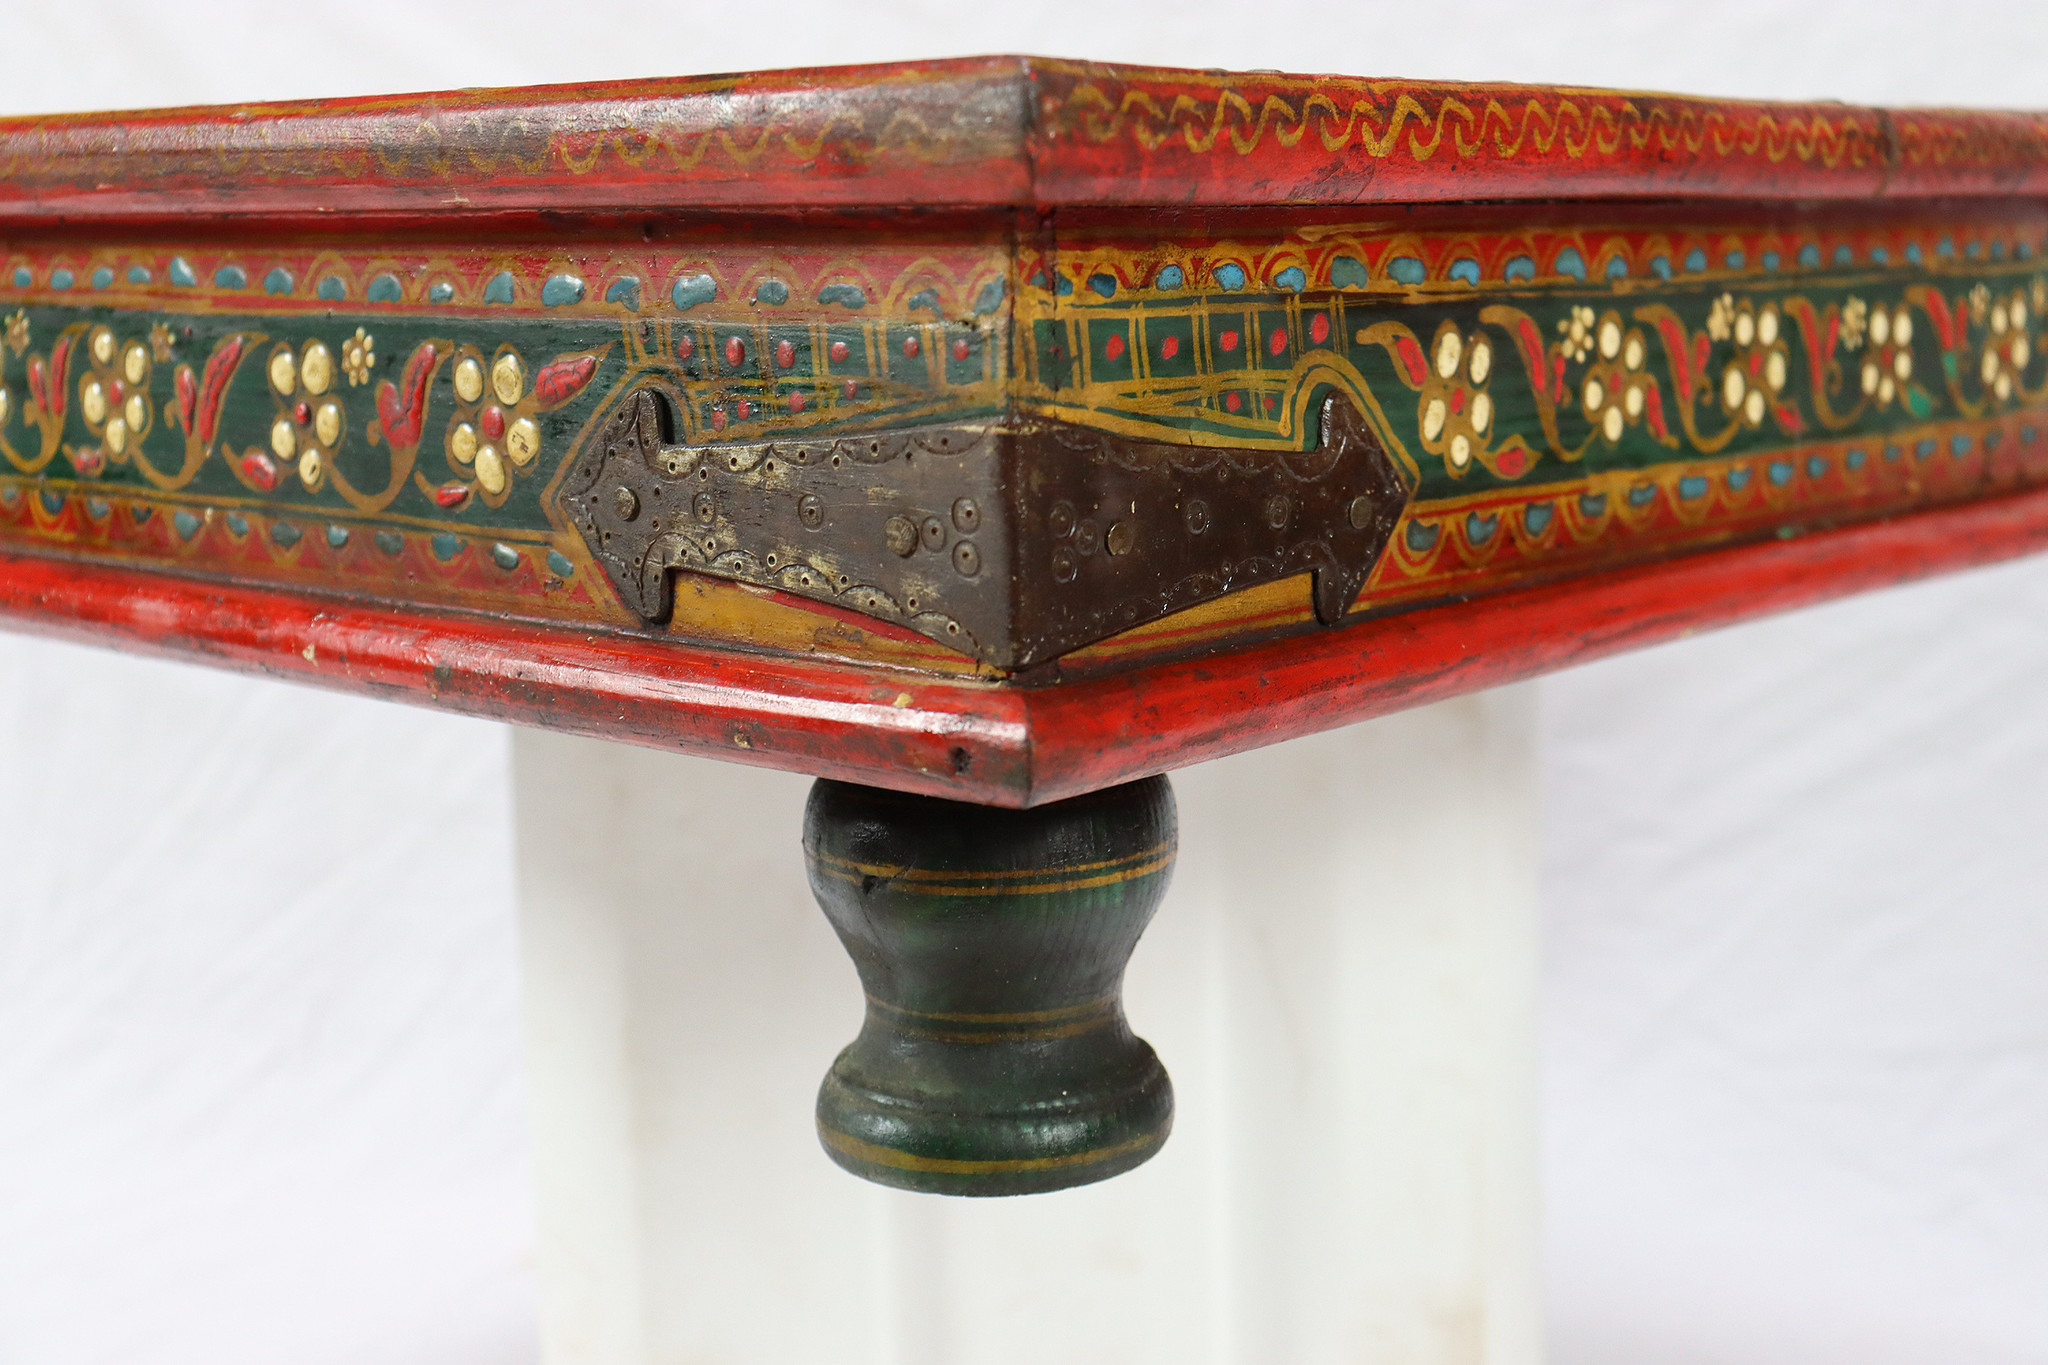 80x80 cm orient vintage hand painted  low tea table Coffee side Table from Afghanistan 22/D